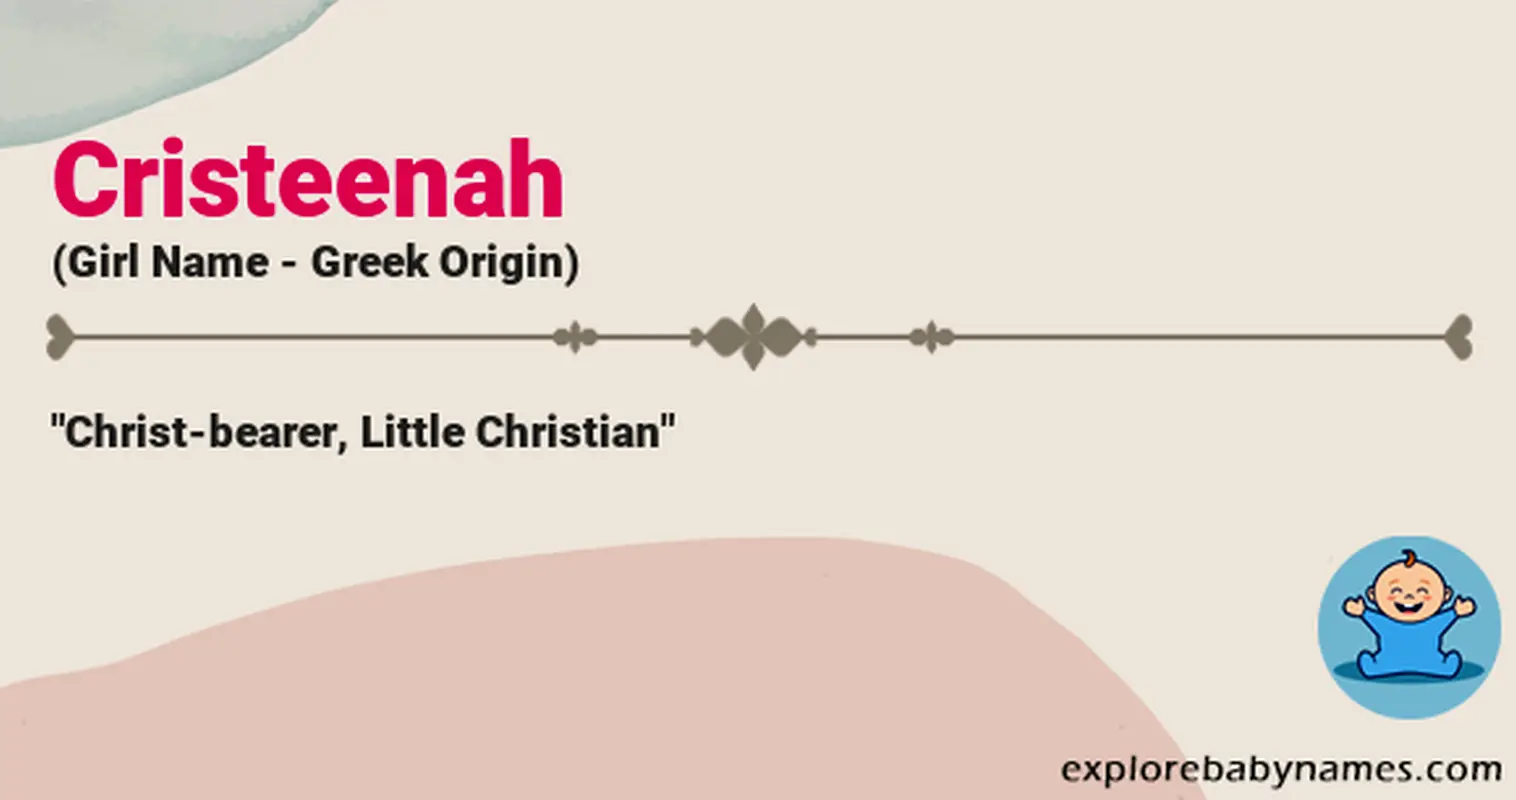 Meaning of Cristeenah